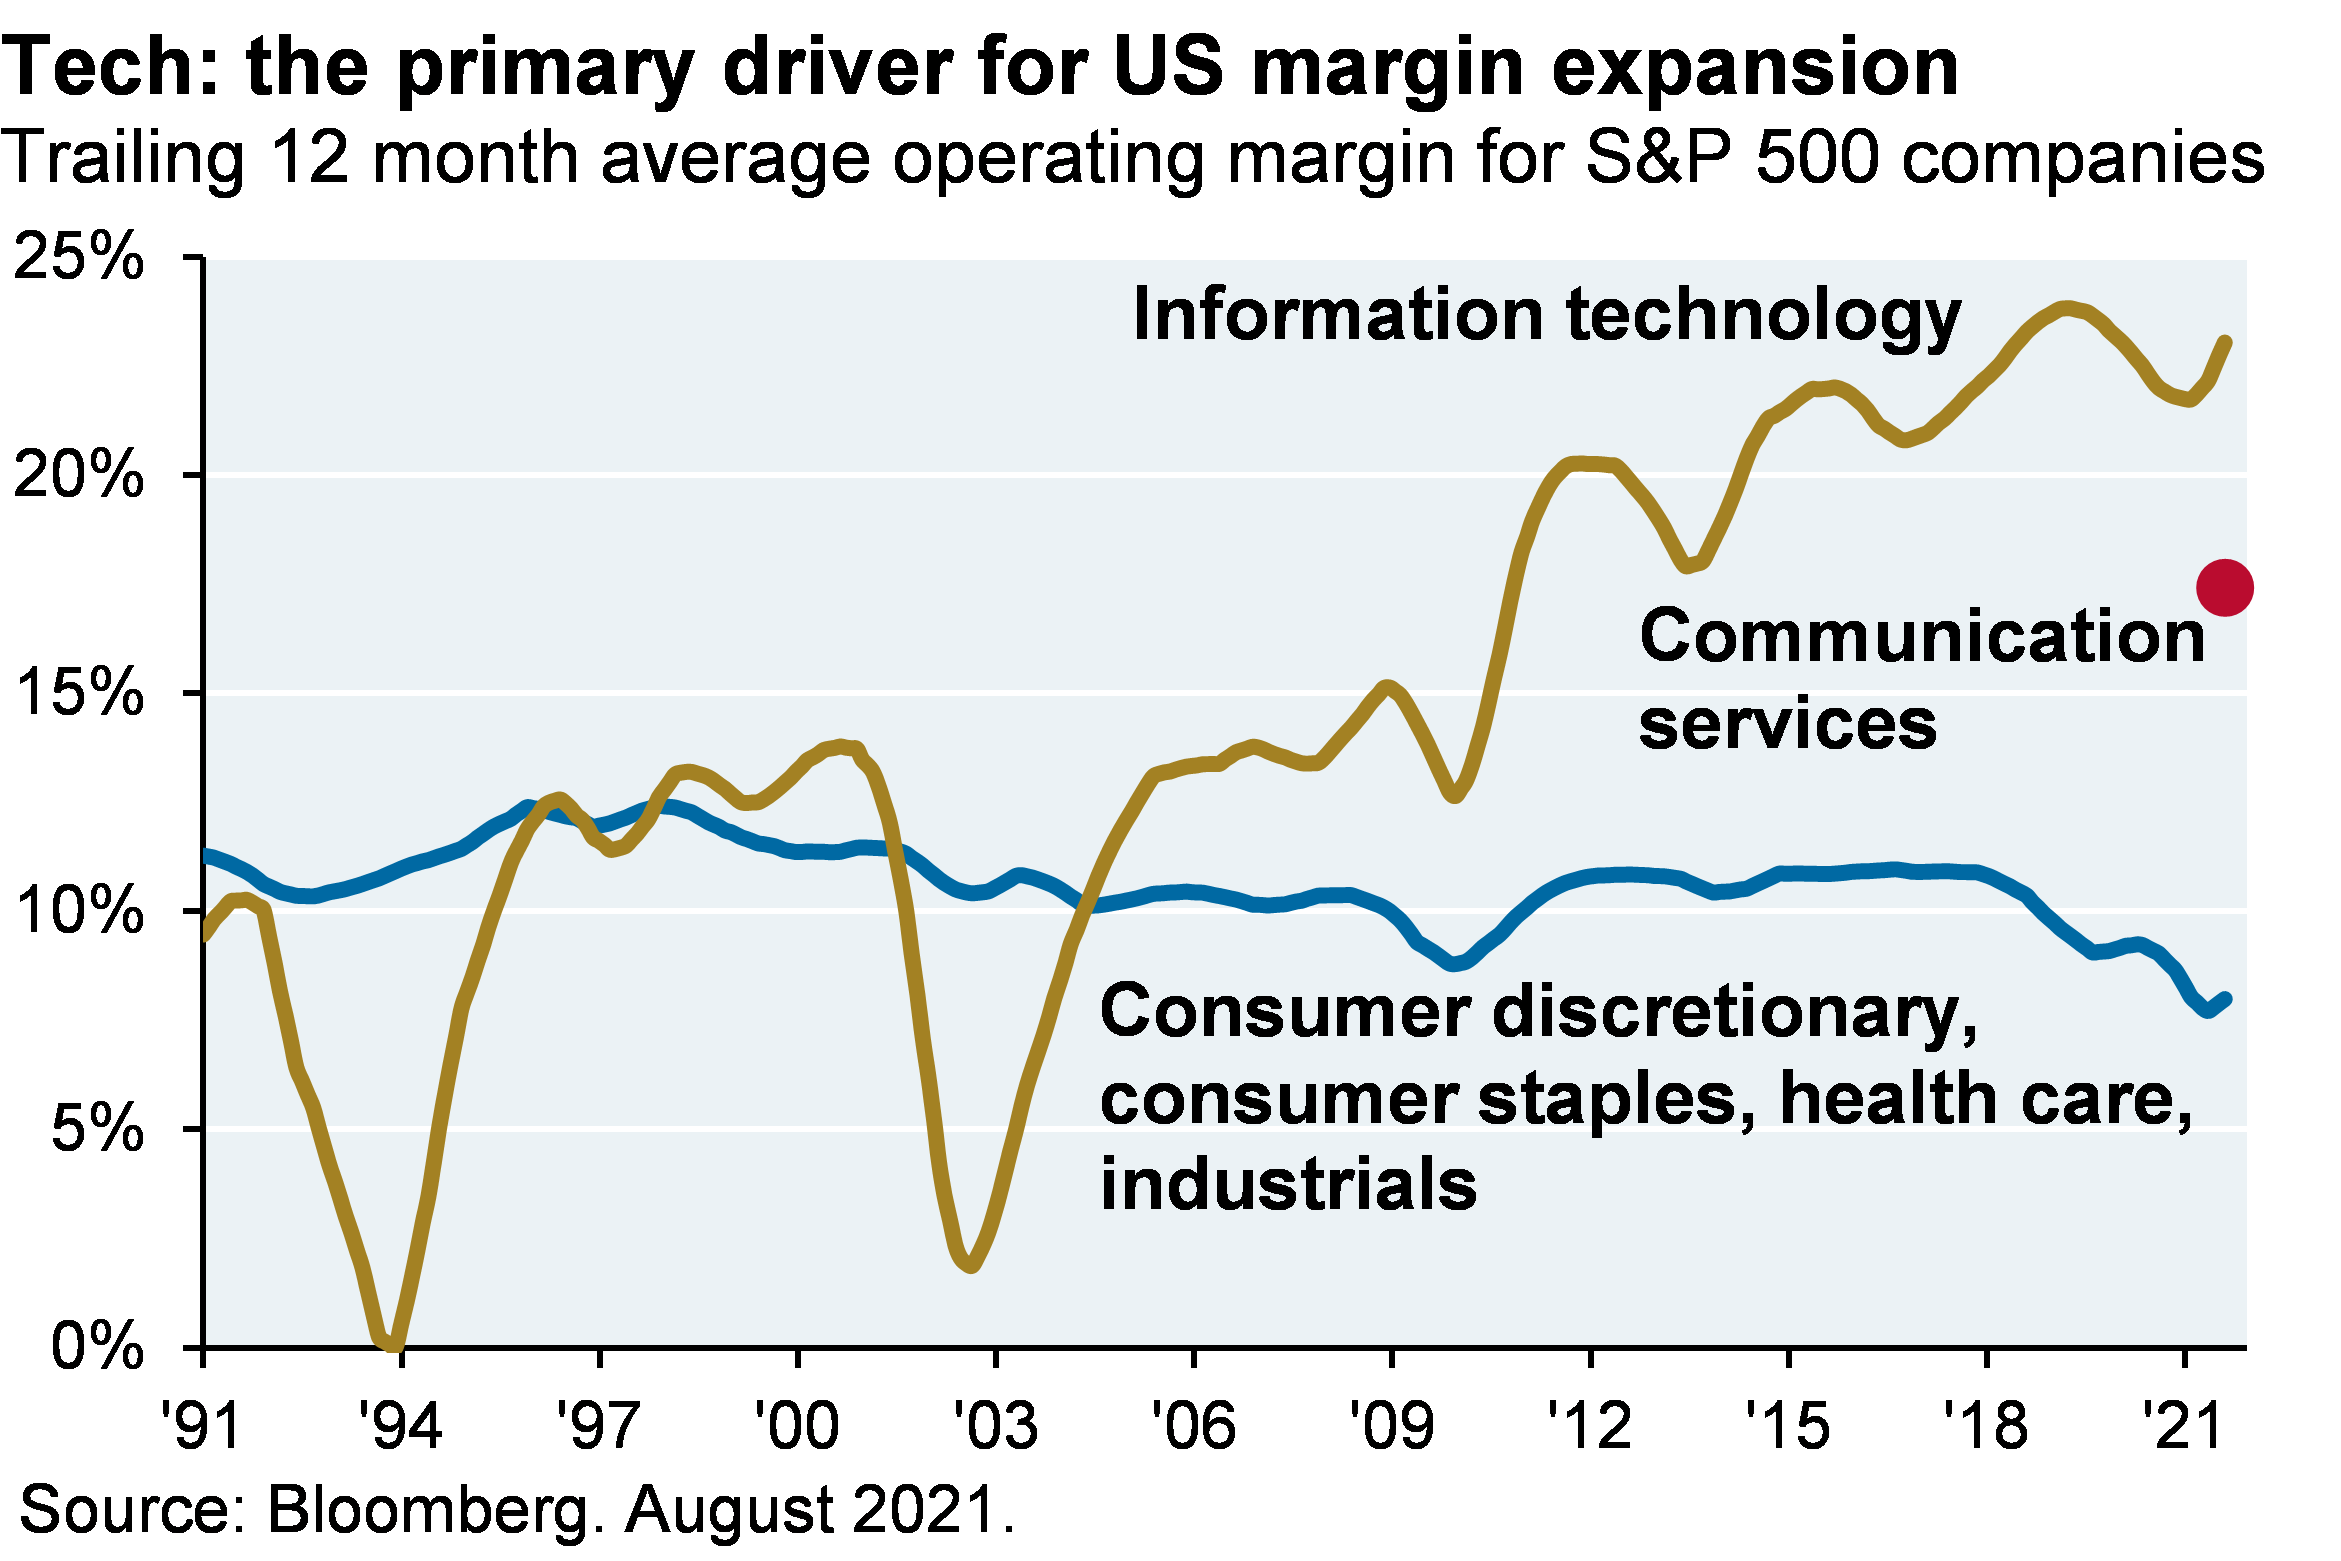 Line chart shows that tech has been the primary driver for US margin expansion. The chart shows the trailing 12-month average operating margin for S&P 500 companies for information technology, communication services and consumer discretionary, consumer staples, health care and industrials. The operating margin for information technology has risen from around 2% in 2003 to its latest value of around 22%. The average operating margin for consumer discretionary, consumer staples, health care and industrials has remained relatively constant at around 10% but has recently declined to around 8%. The latest operating margin for communication services is around 17%.